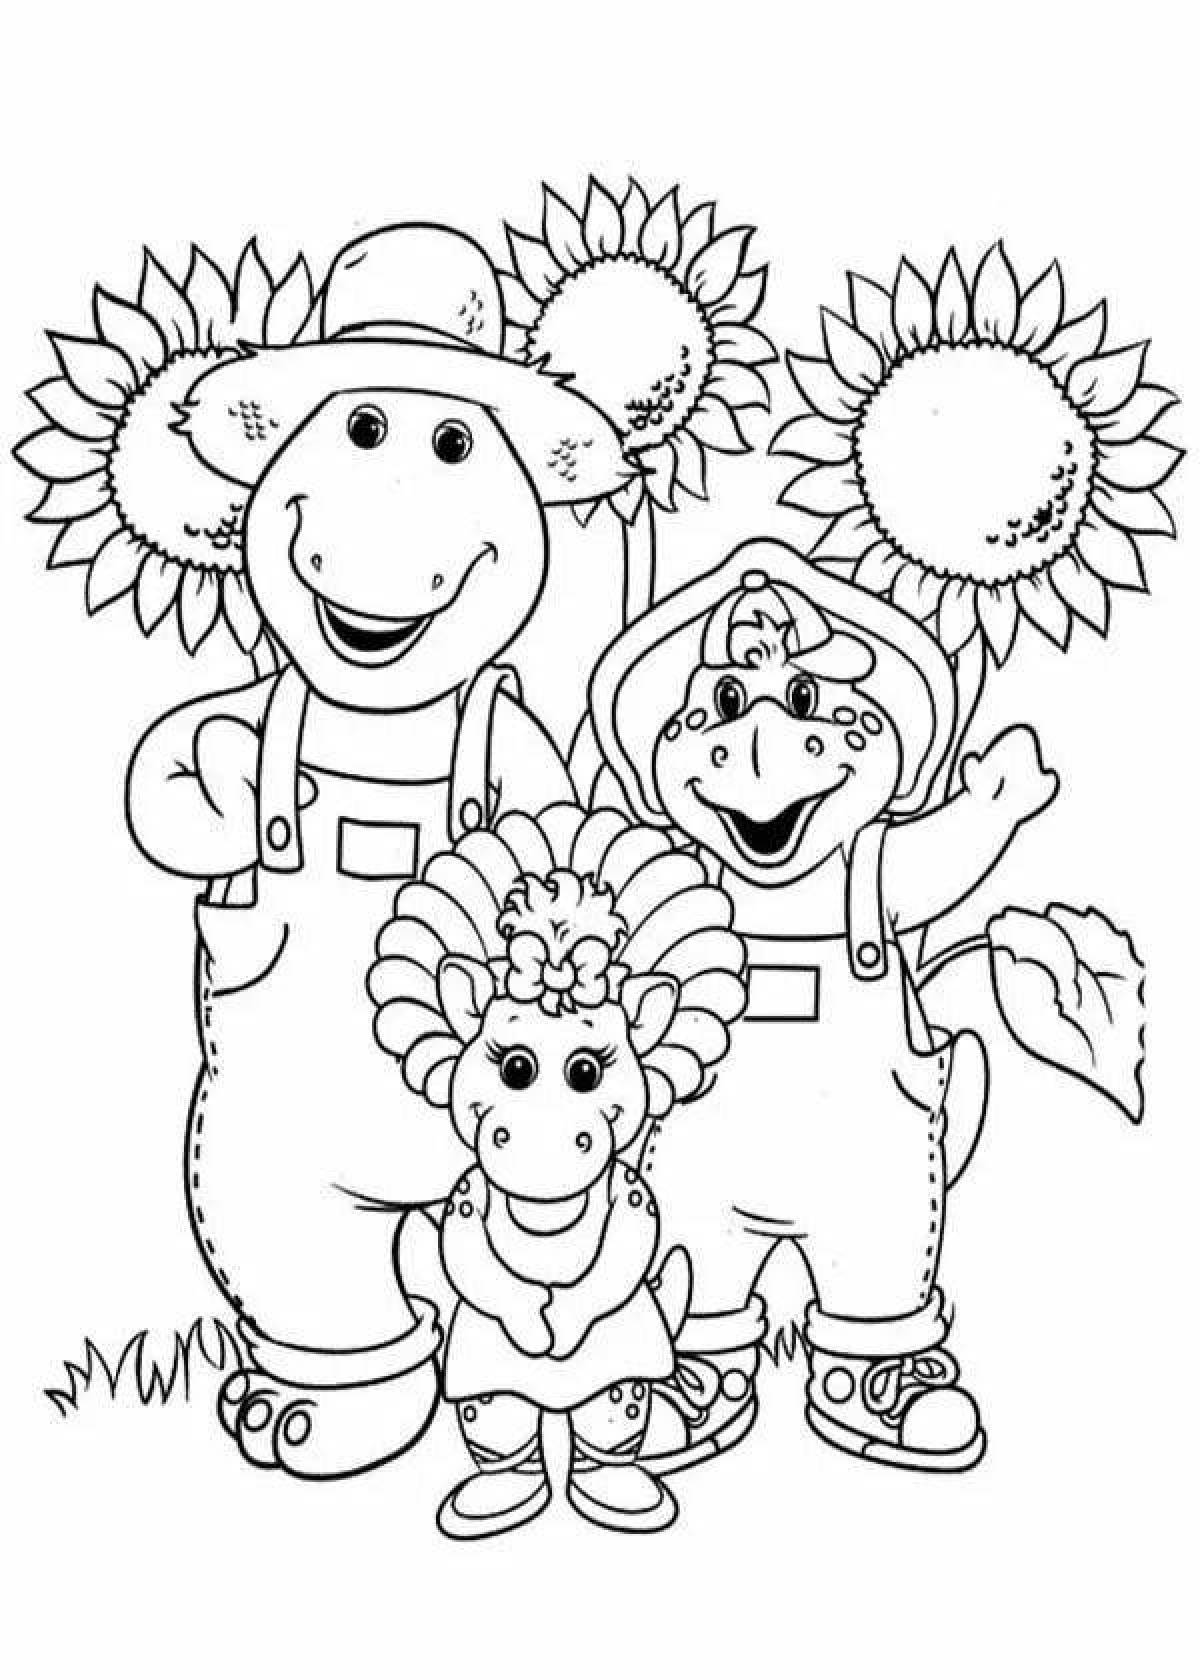 Barney's playful coloring page